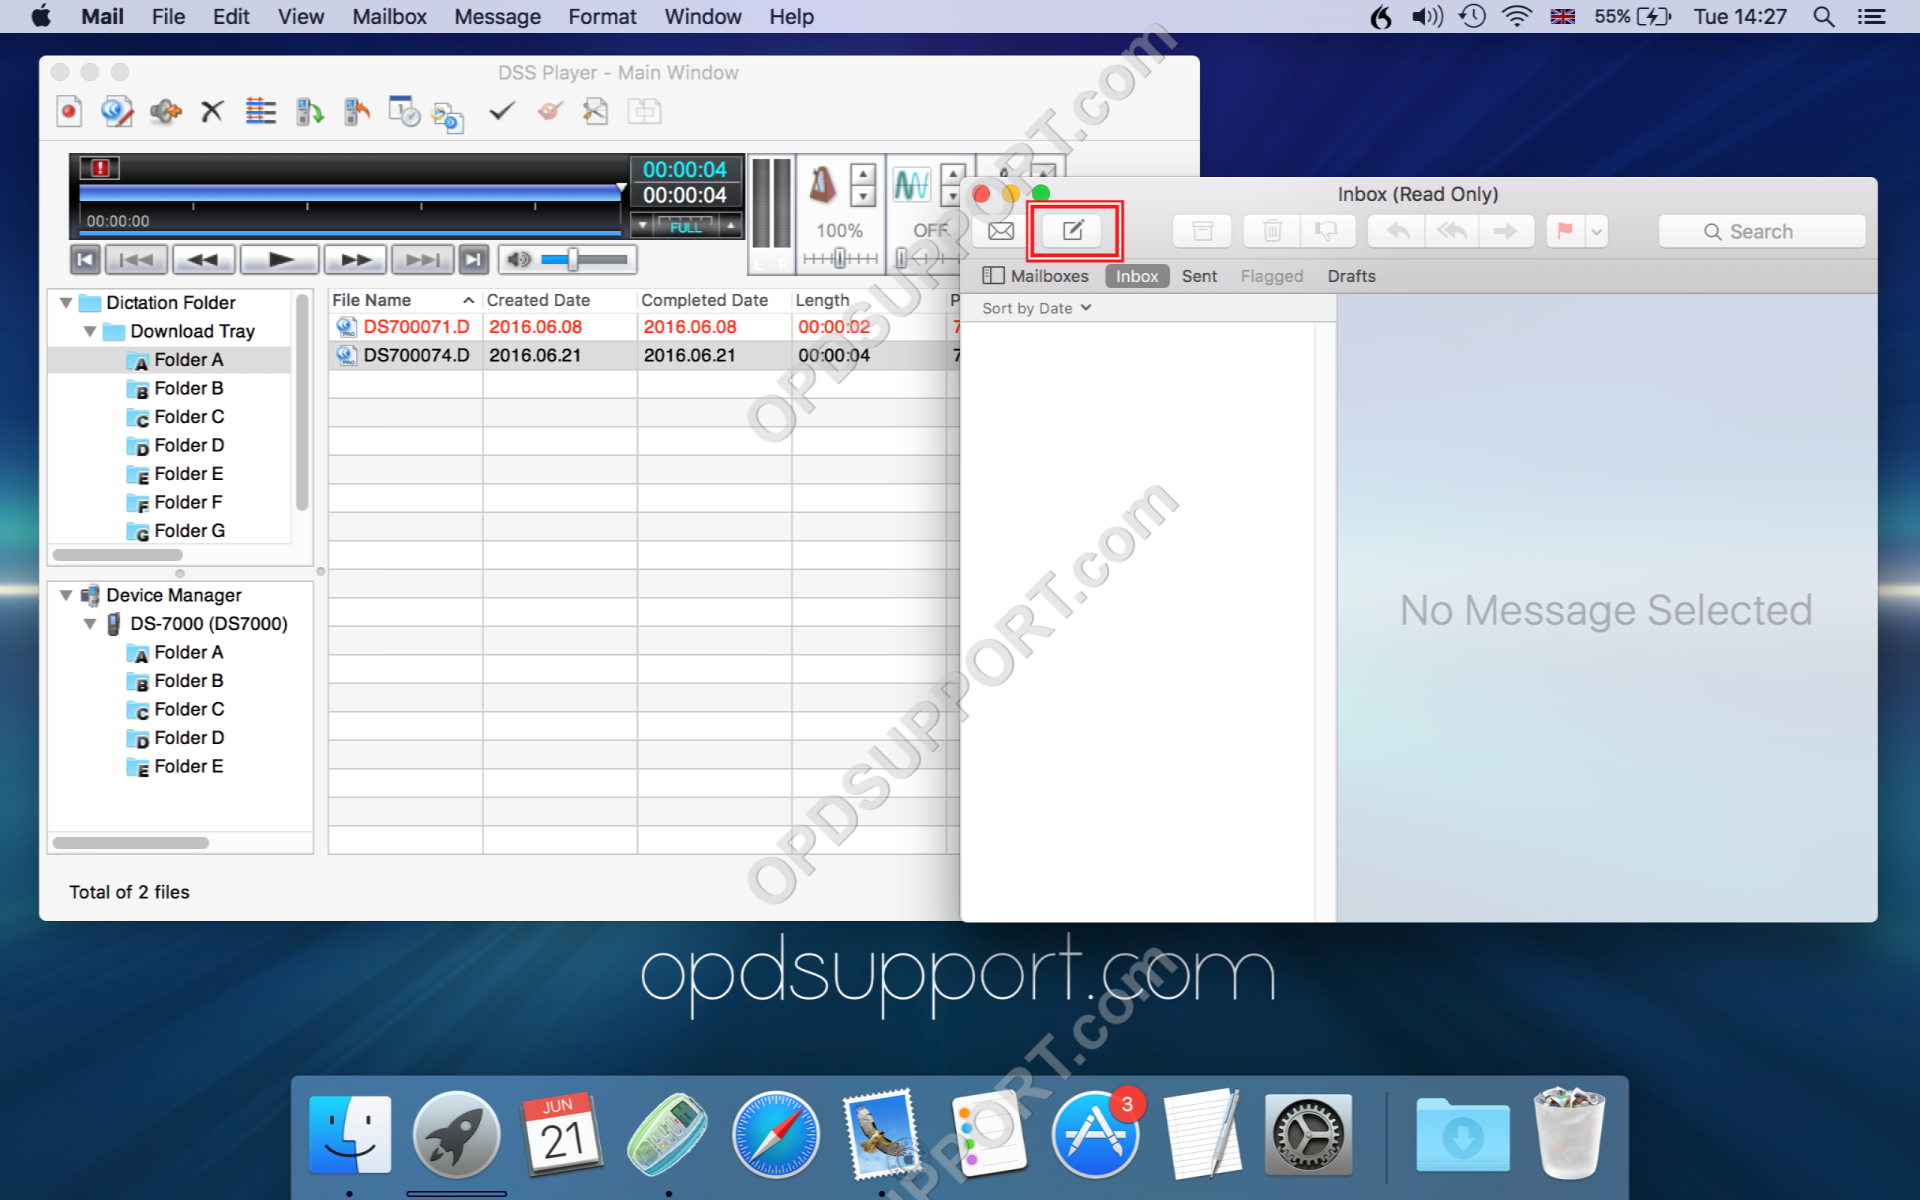 DSS Player for Mac. Send dictation by Email3